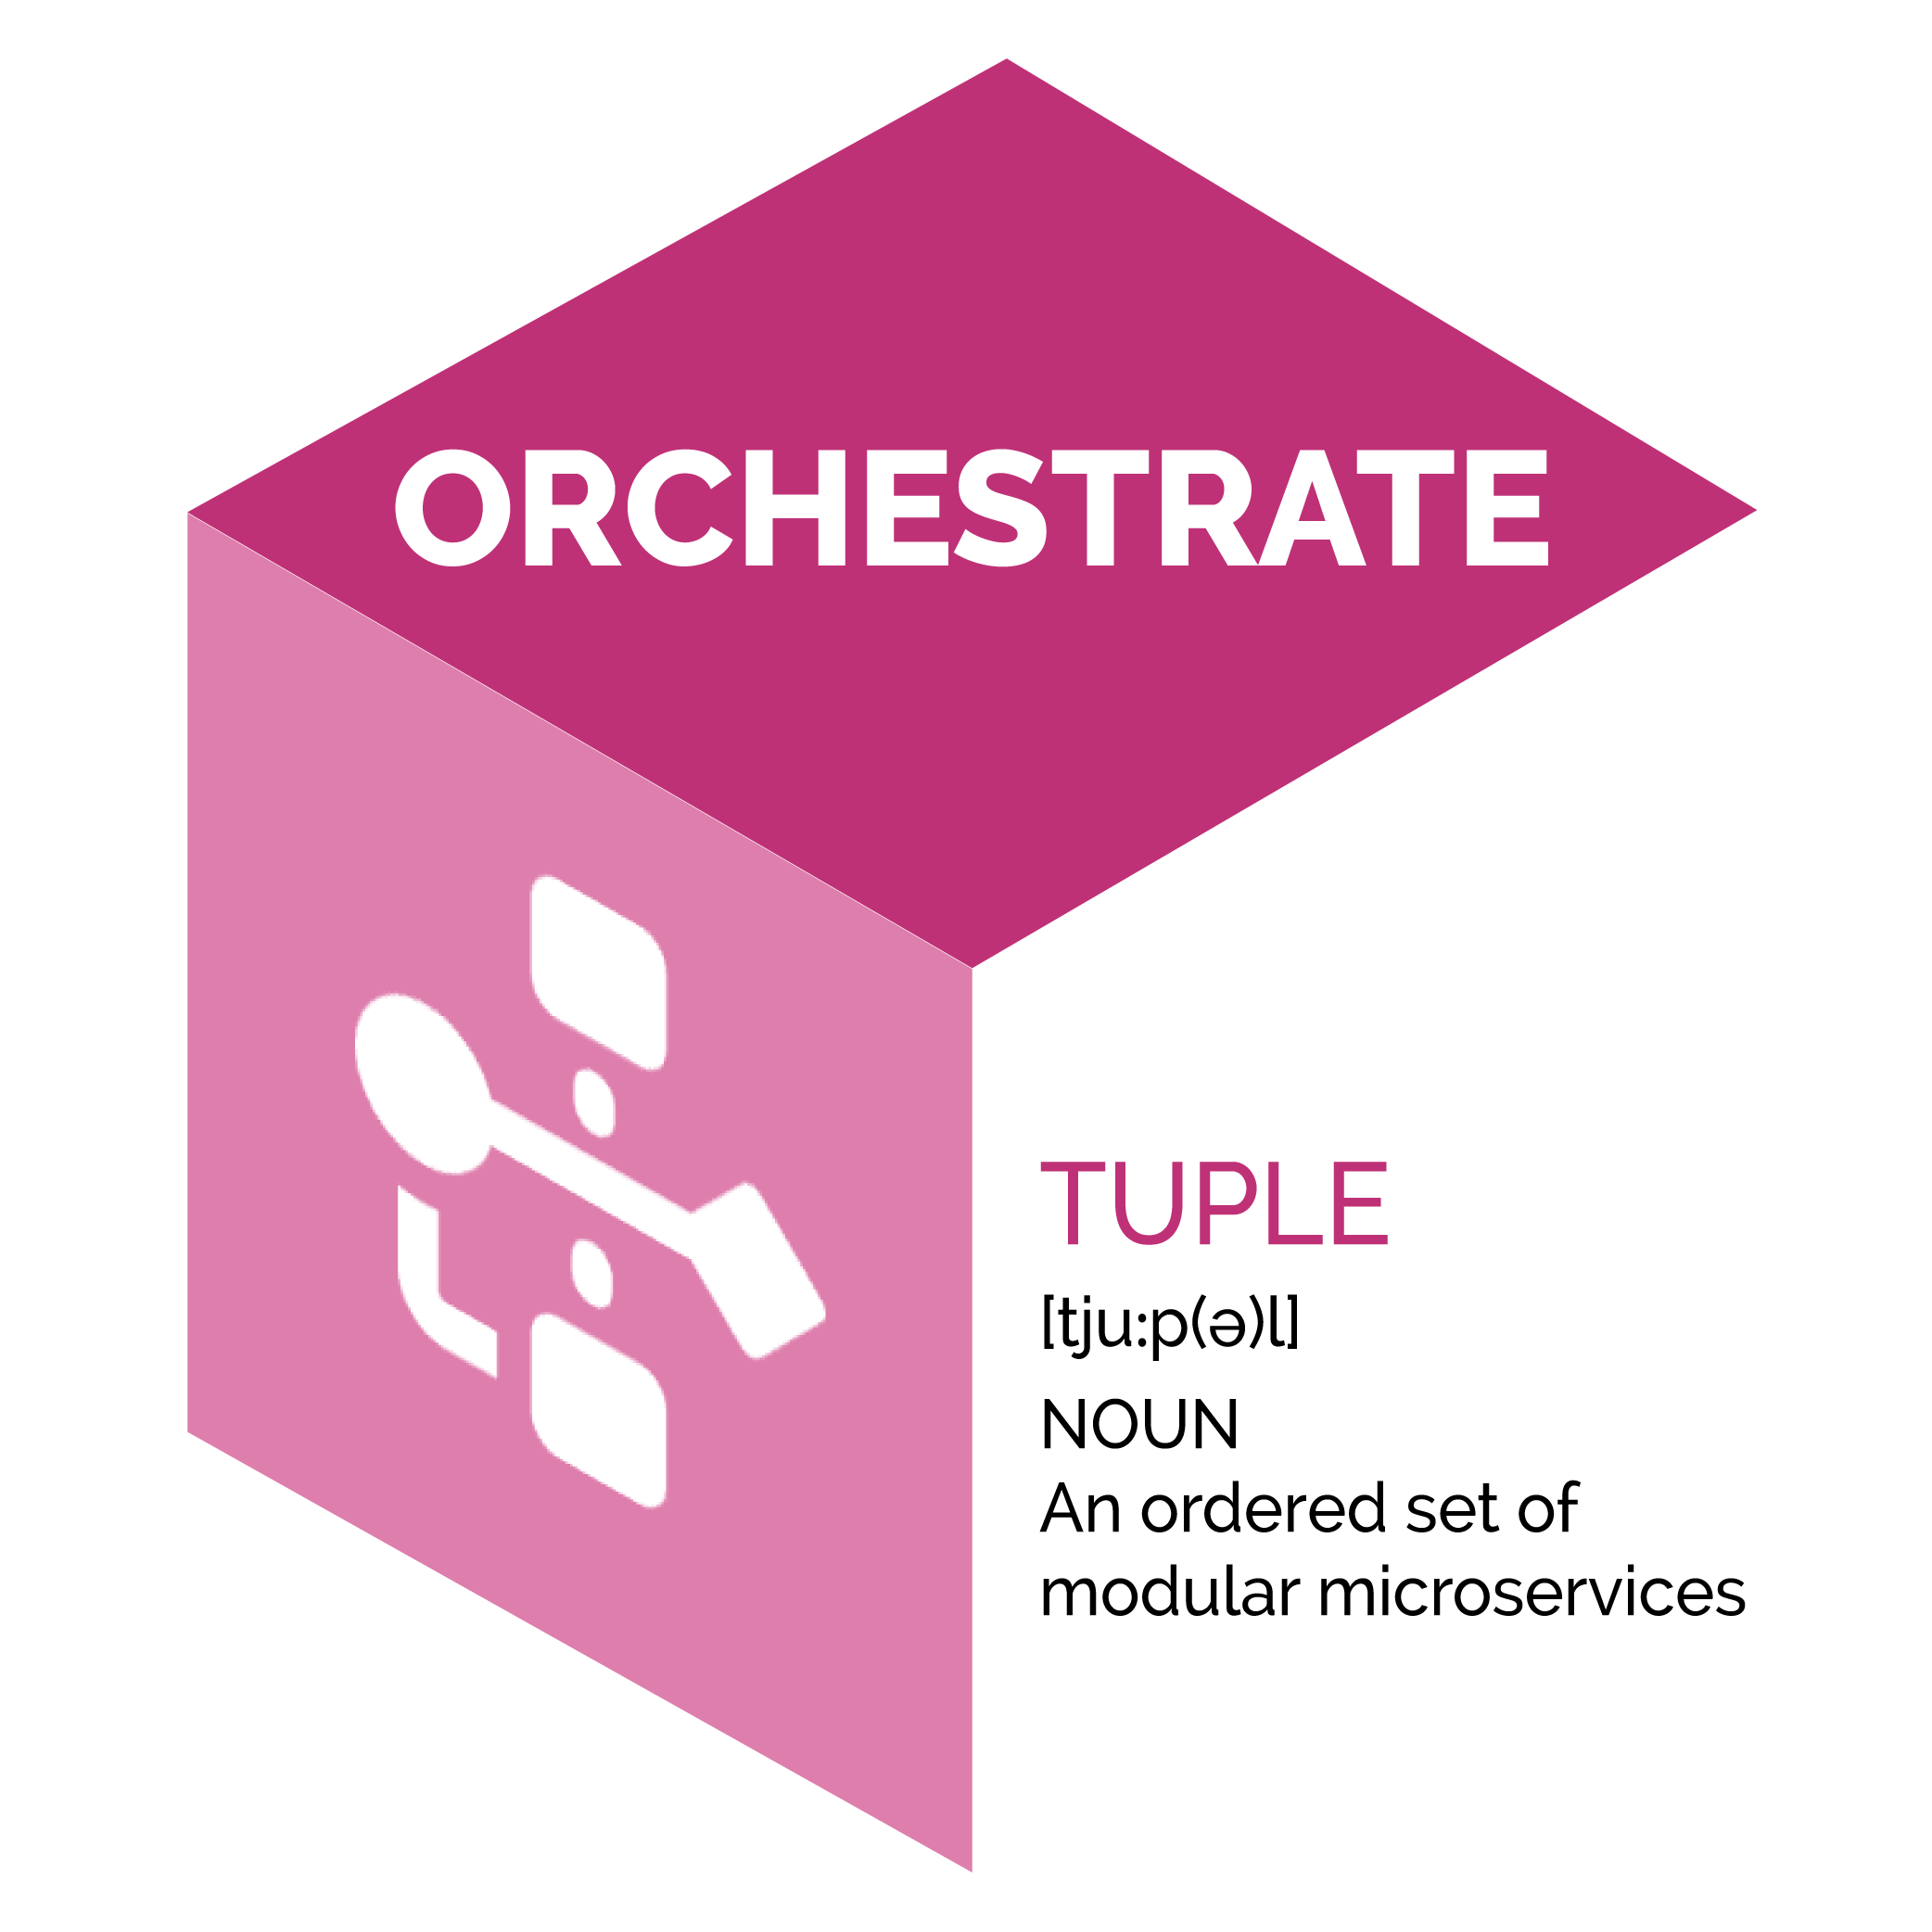 orchestrate tuple image definition modular-01